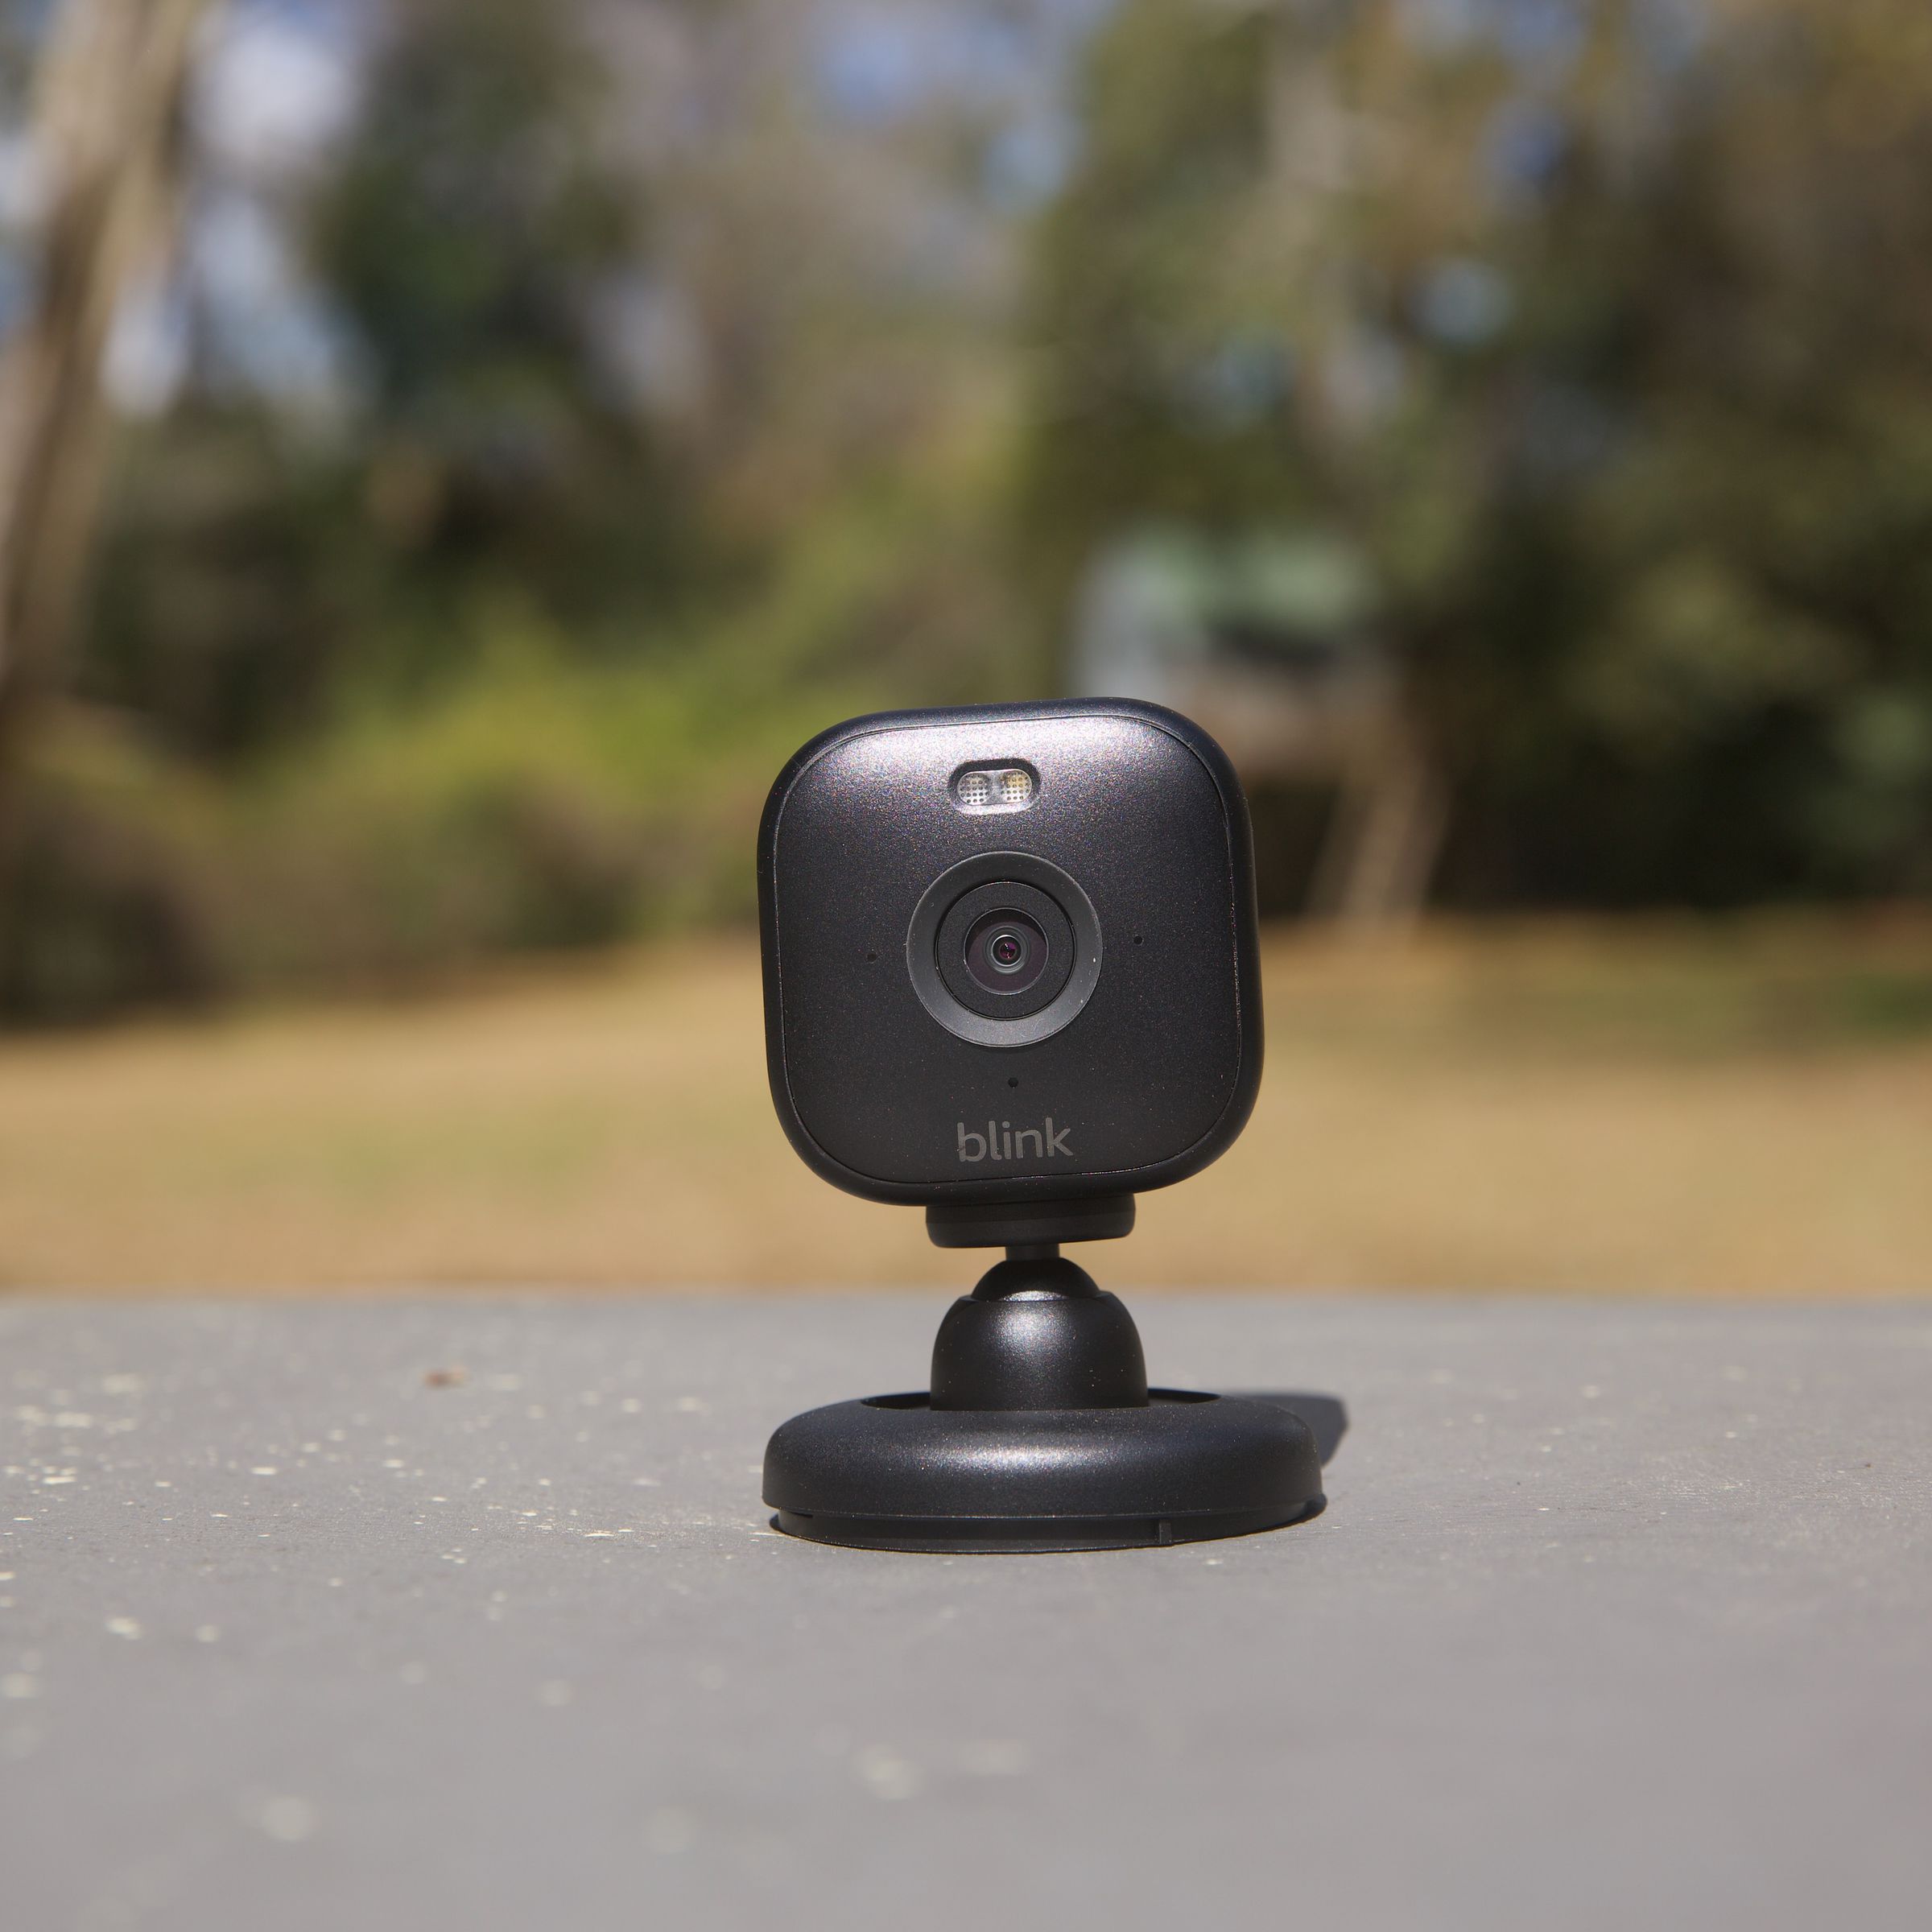 The Blink Mini 2 is an indoor / outdoor camera for $40 or $50 if you add the weather-resistant power cable. 